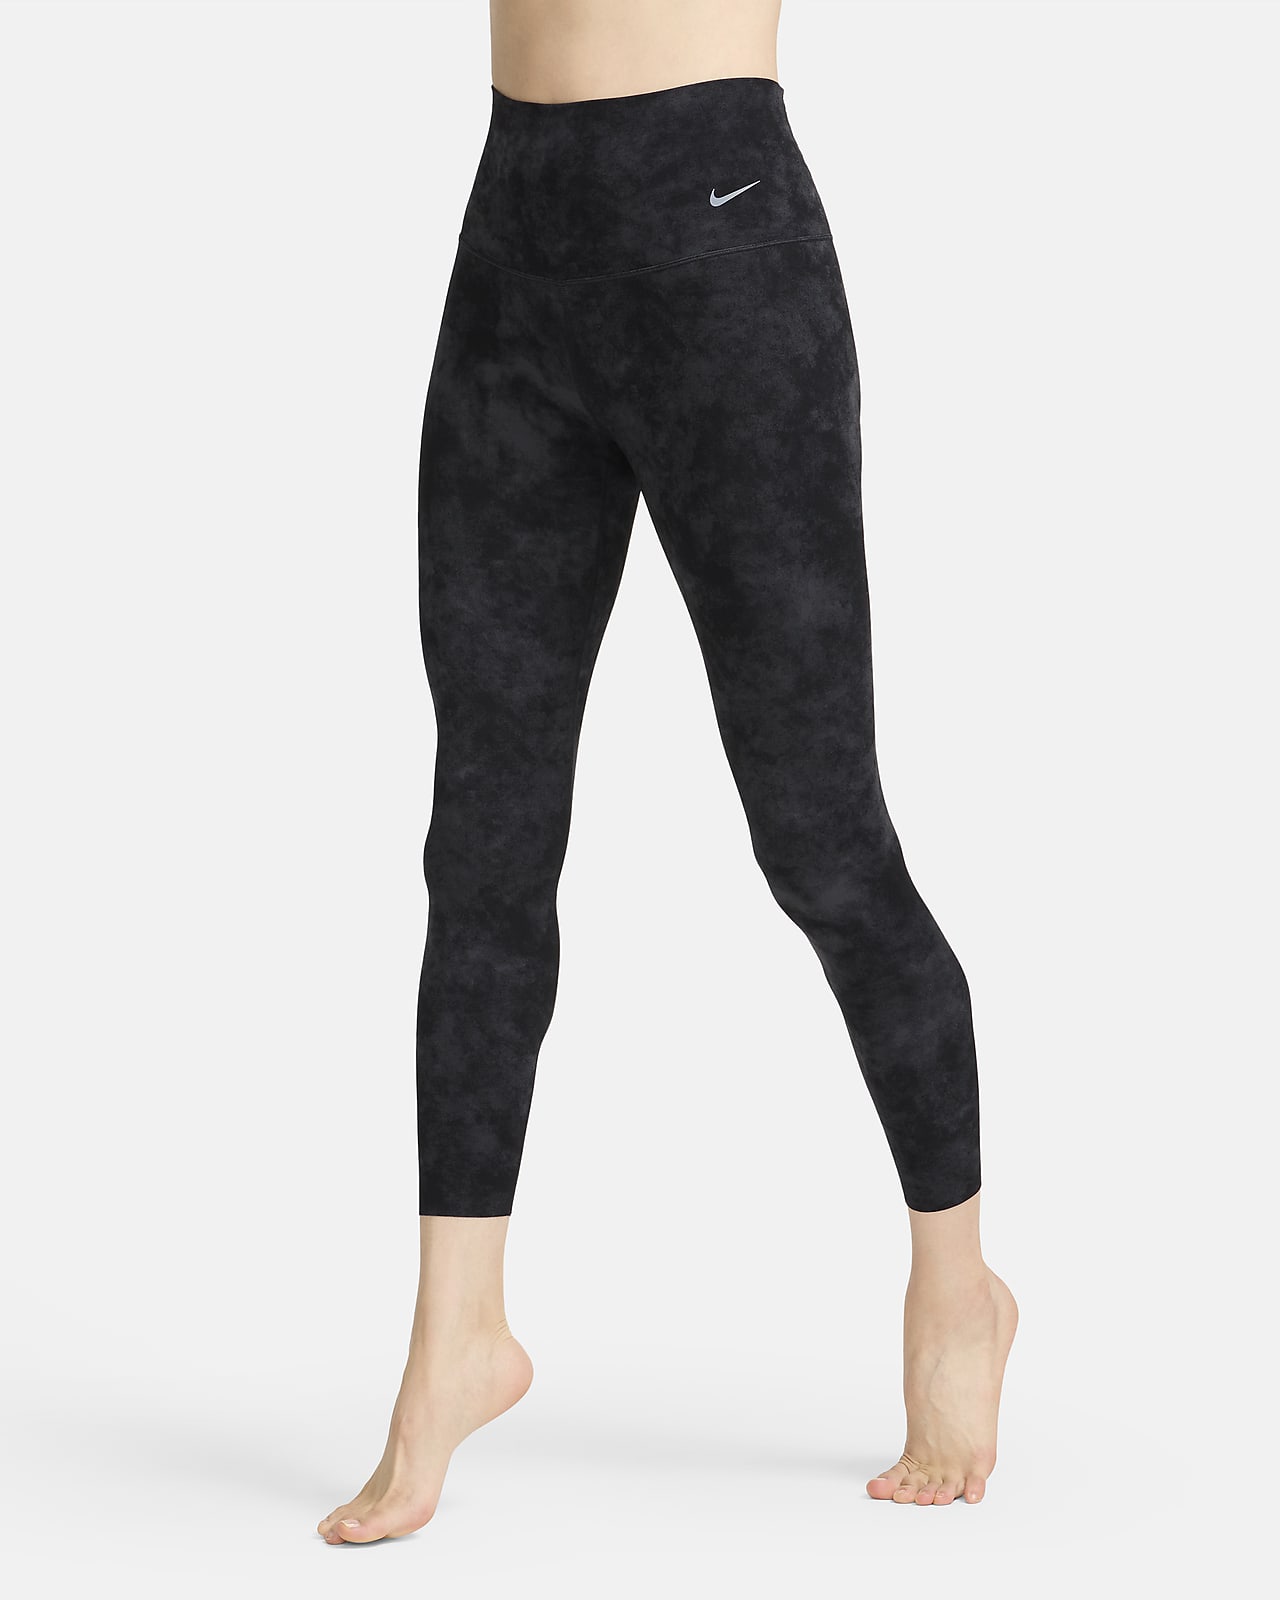 Nike, Dri-FIT Zenvy Women's Gentle-Support High-Waisted 7/8 Leggings, Performance Tights